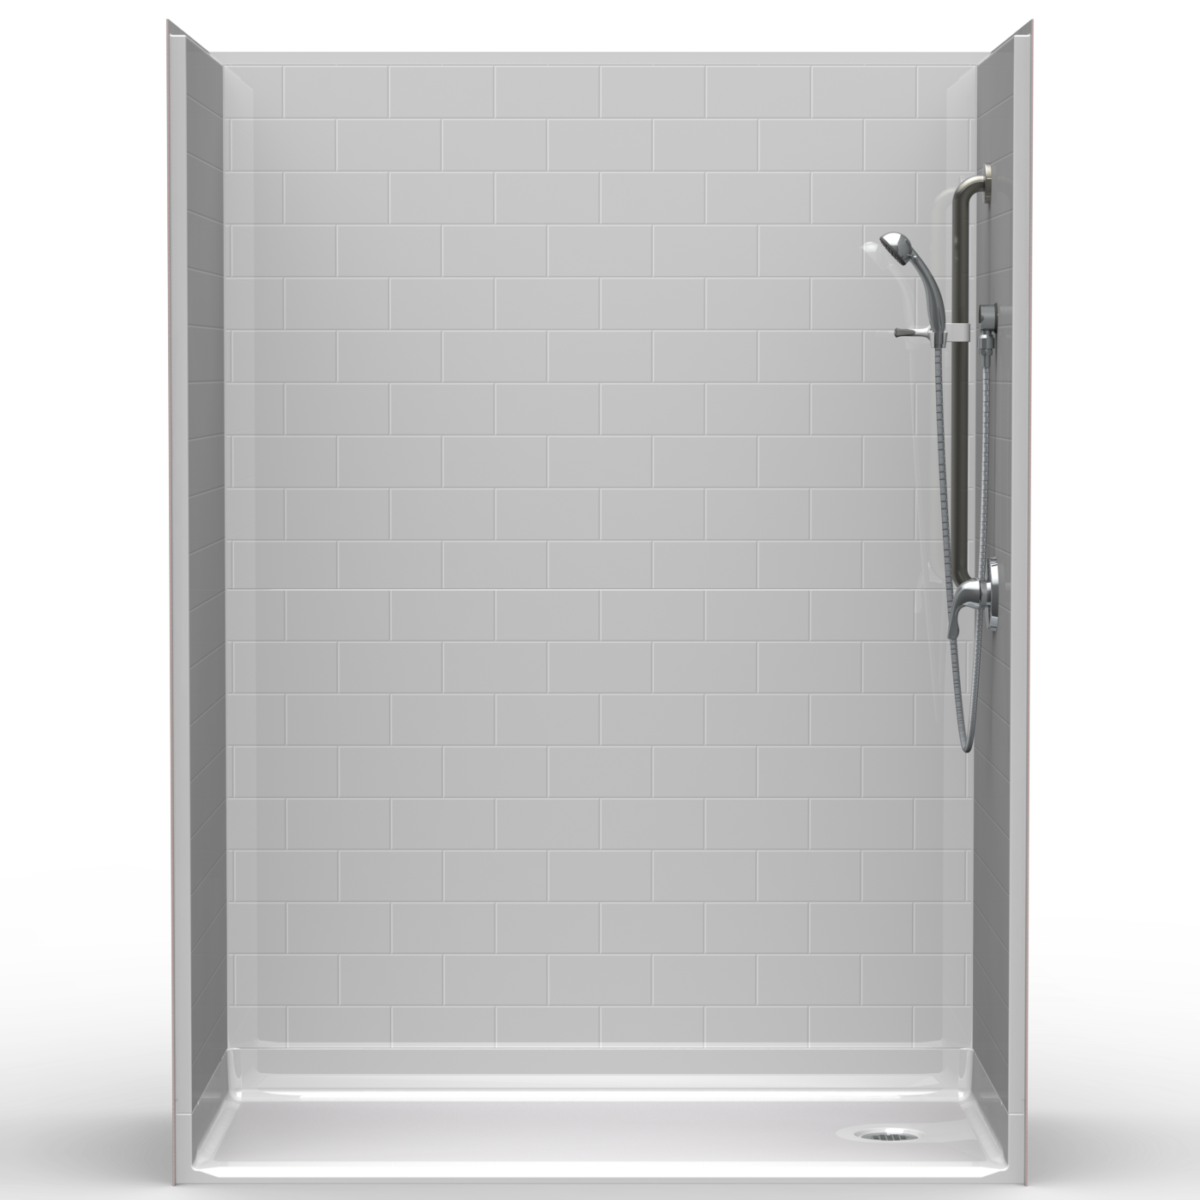 5LBS6030FBE75B, Five Piece 60” x 30” Roll in Shower, .75” Threshold, End Drain, “Subway Tile”